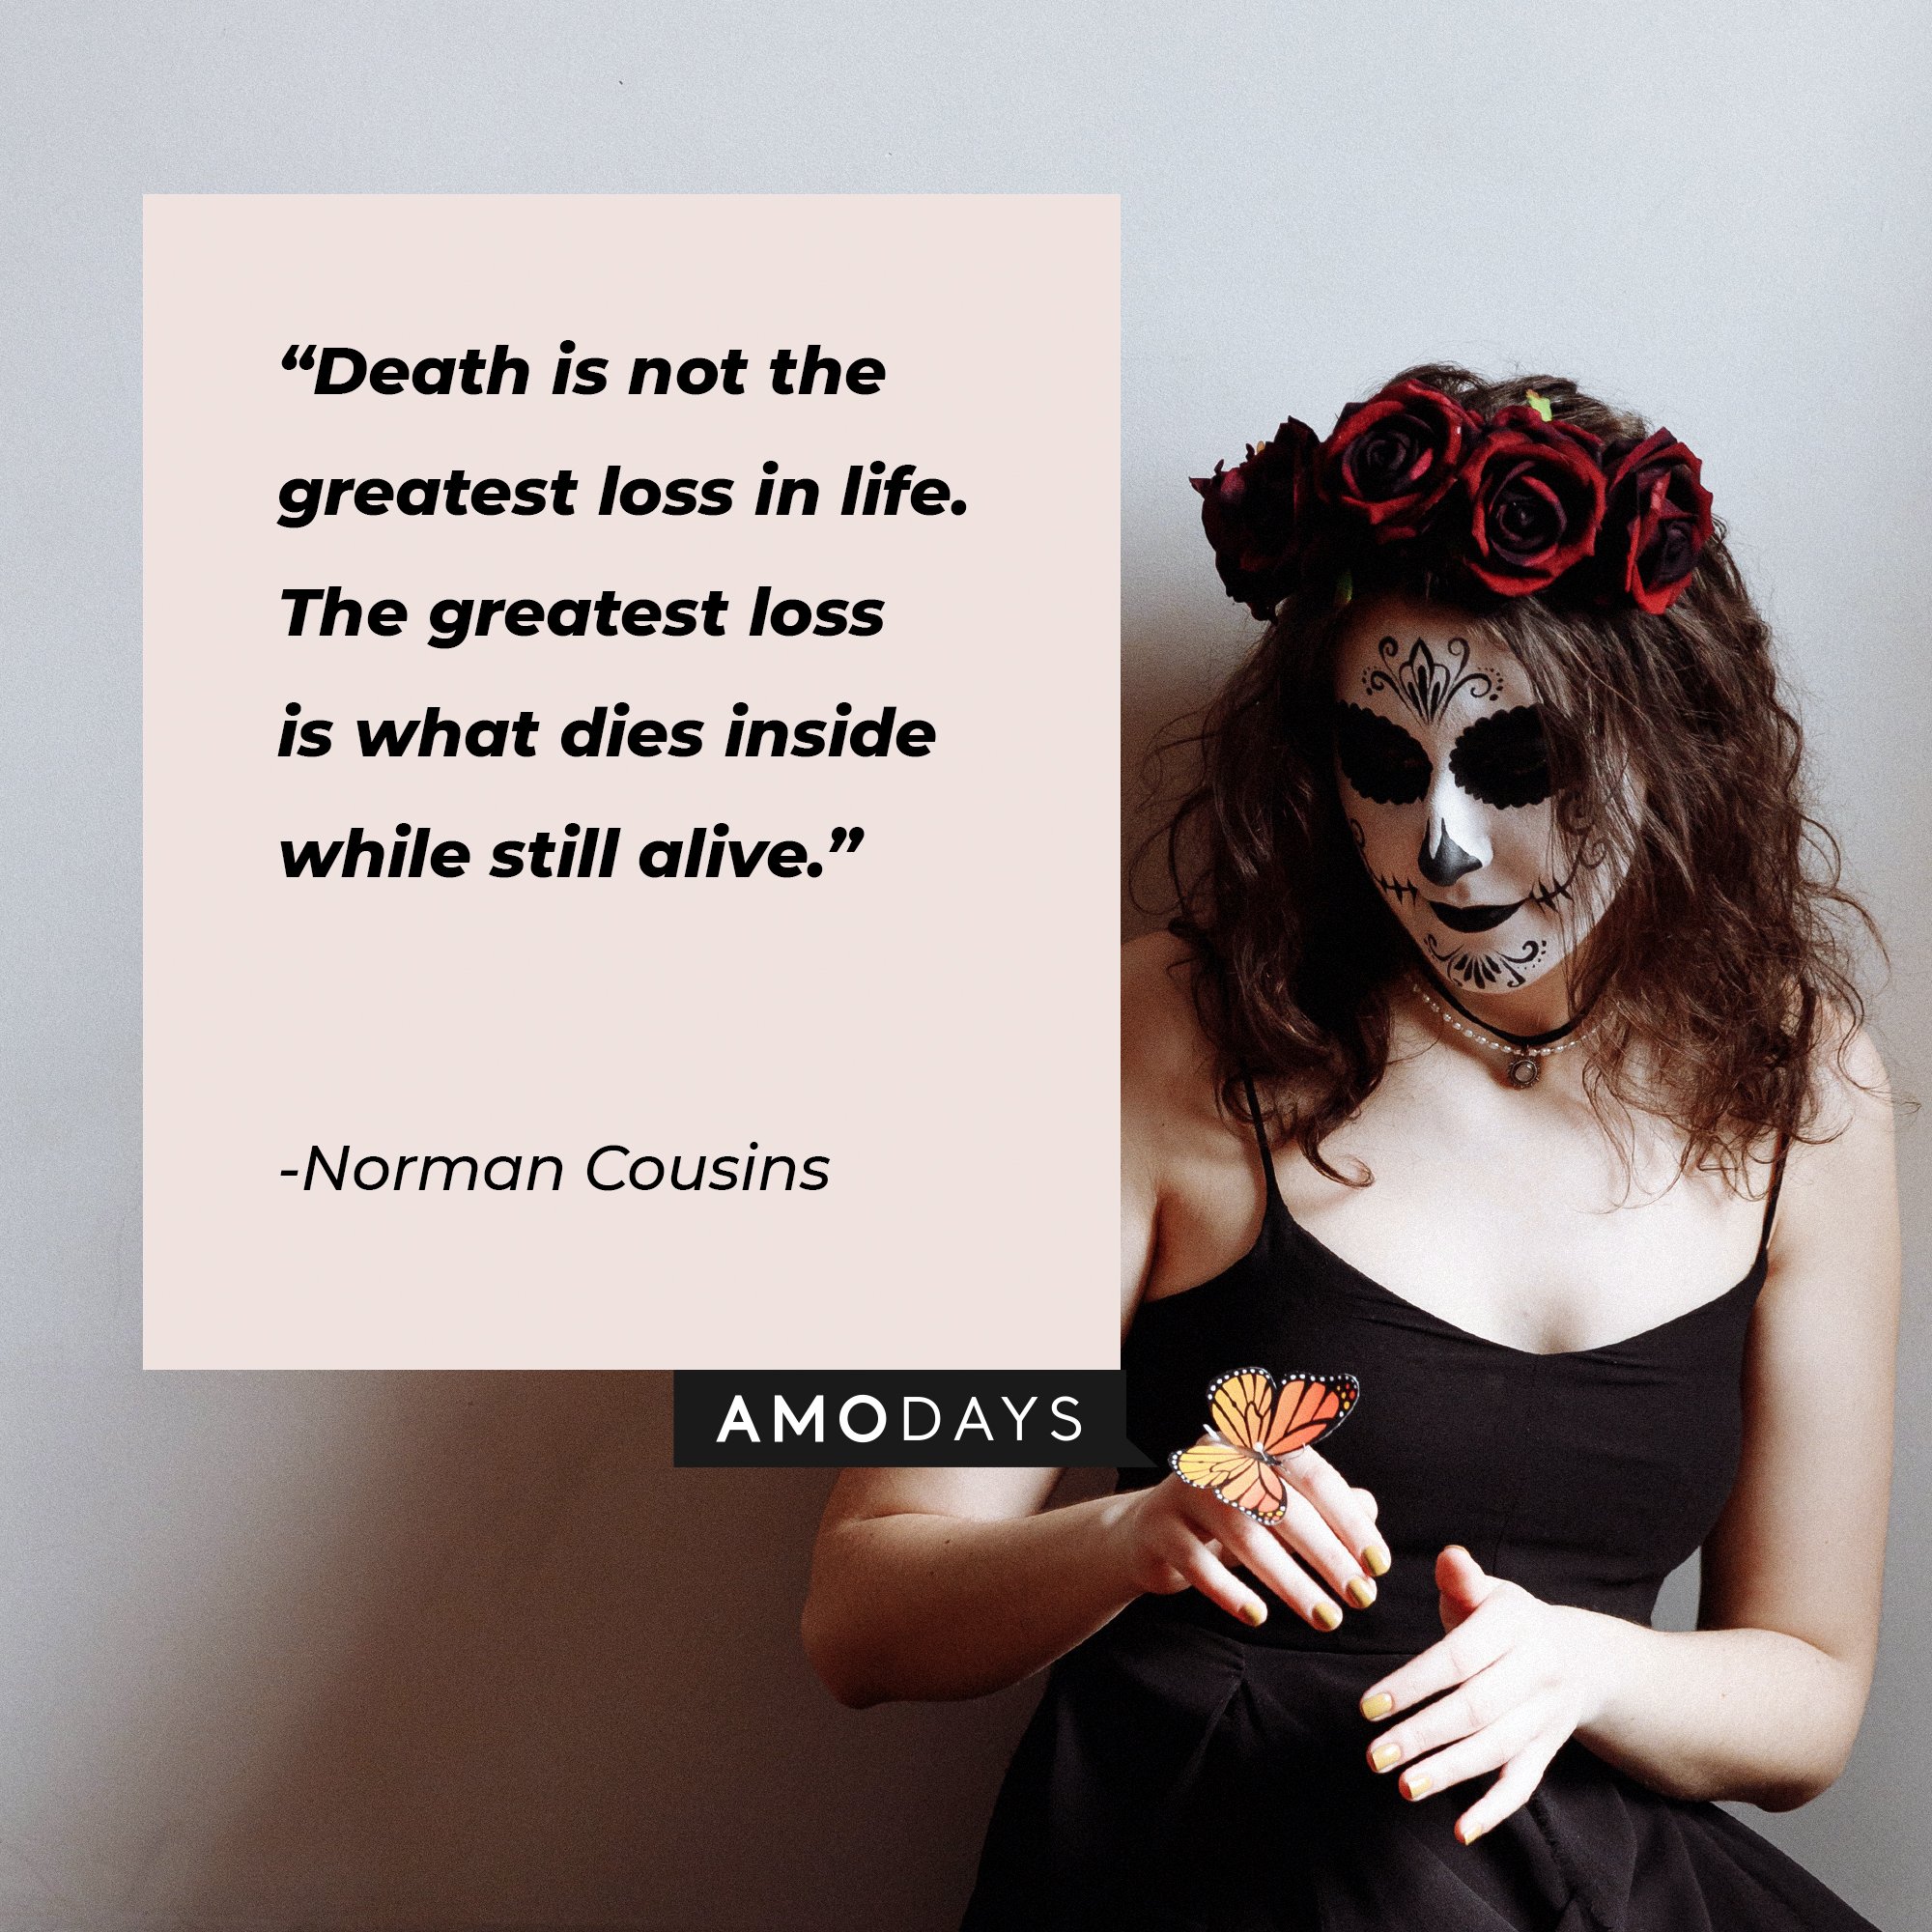 Norman Cousins’ quote: "Death is not the greatest loss in life. The greatest loss is what dies inside while still alive." | Image: AmoDays  